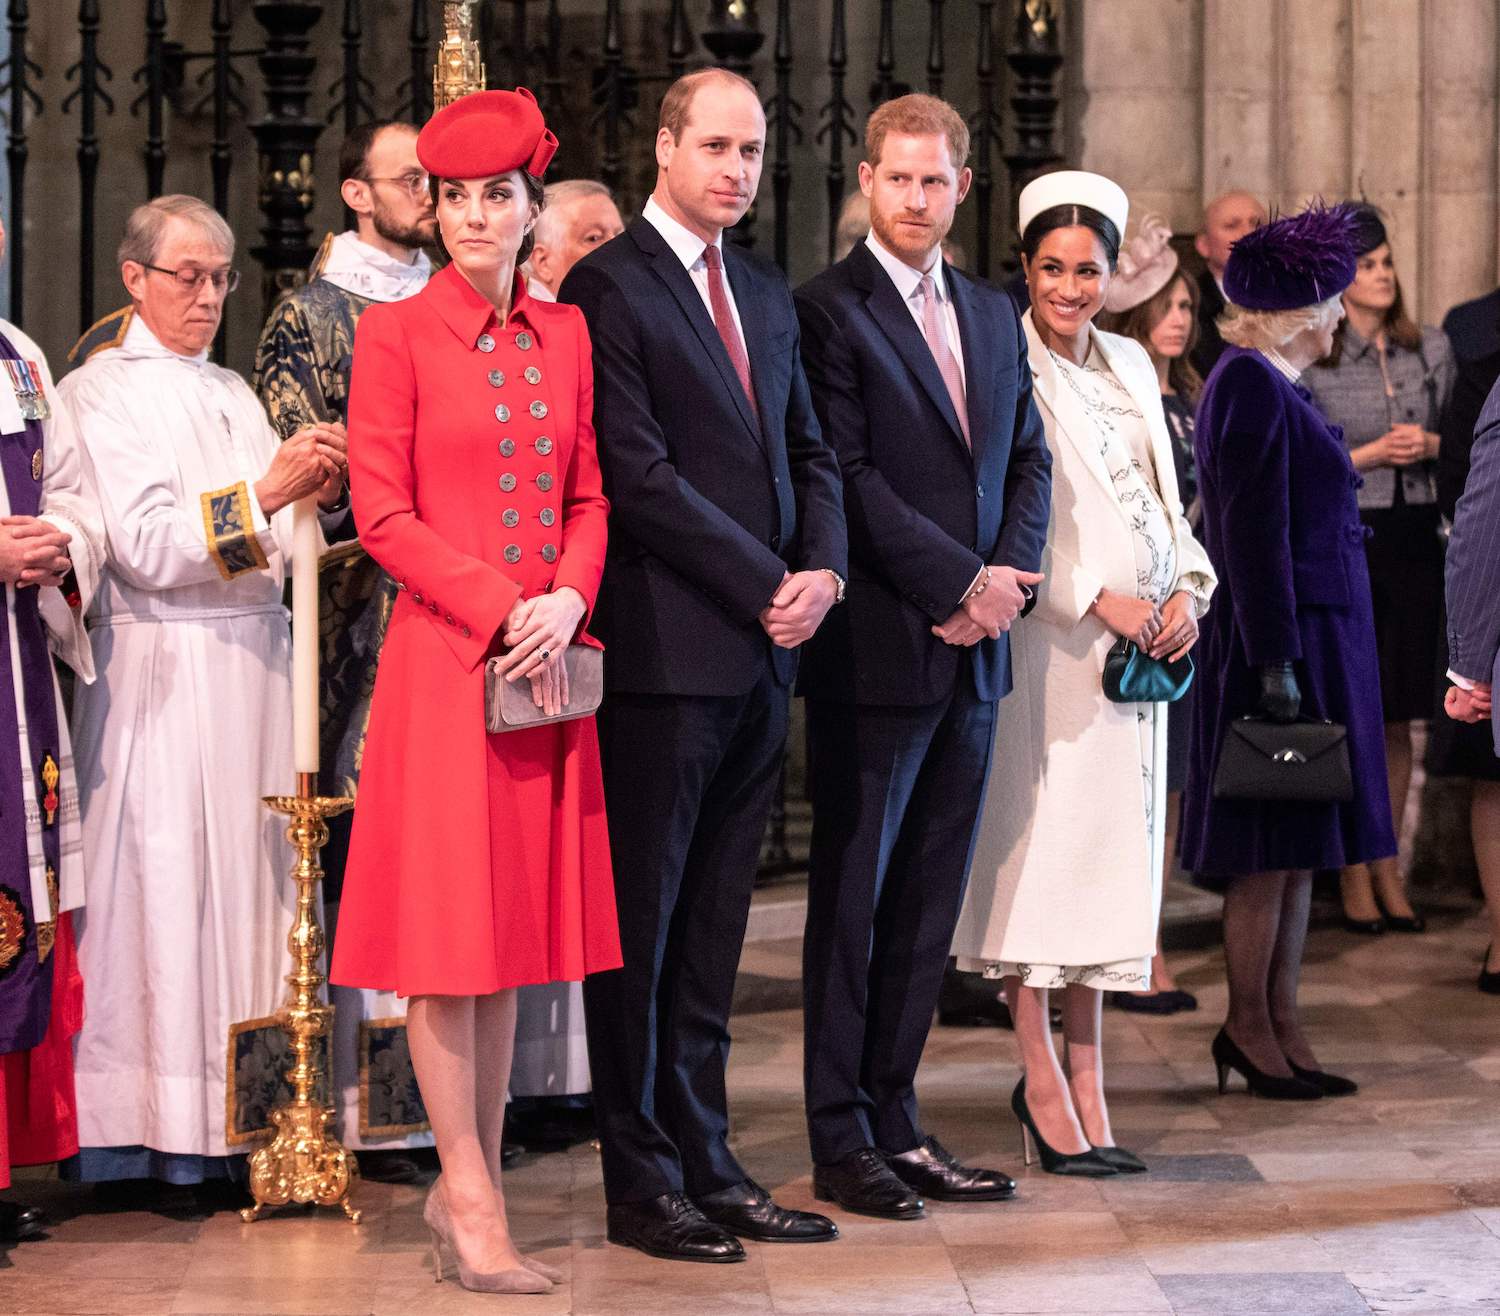 Kate Middleton, Prince William, Prince Harry, and Meghan Markle attend the Commonwealth Day service at Westminster Abbey in London on March 11, 2019